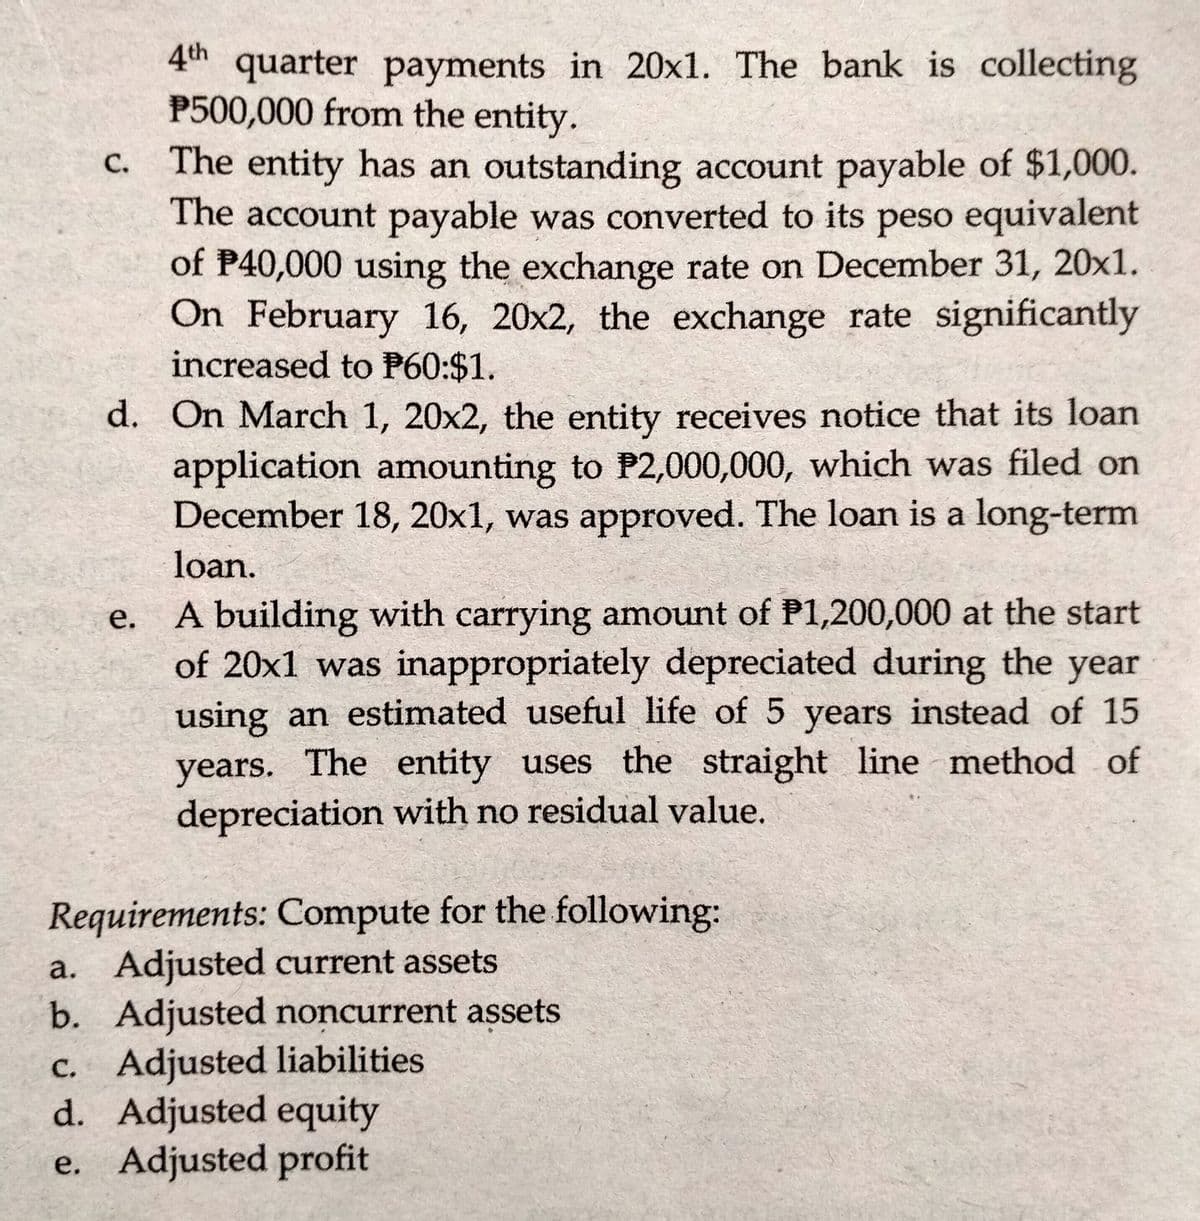 4th quarter payments in 20x1. The bank is collecting
P500,000 from the entity.
The entity has an outstanding account payable of $1,000.
The account payable was converted to its peso equivalent
of P40,000 using the exchange rate on December 31, 20x1.
On February 16, 20x2, the exchange rate significantly
increased to P60:$1.
d. On March 1, 20x2, the entity receives notice that its loan
application amounting to P2,000,000, which was filed on
December 18, 20x1, was approved. The loan is a long-term
loan.
A building with carrying amount of P1,200,000 at the start
of 20x1 was inappropriately depreciated during the year
using an estimated useful life of 5 years instead of 15
years. The entity uses the straight line method of
depreciation with no residual value.
Requirements: Compute for the following:
a. Adjusted current assets
b. Adjusted noncurrent assets
C. Adjusted liabilities
d. Adjusted equity
e. Adjusted profit
C.
e.
